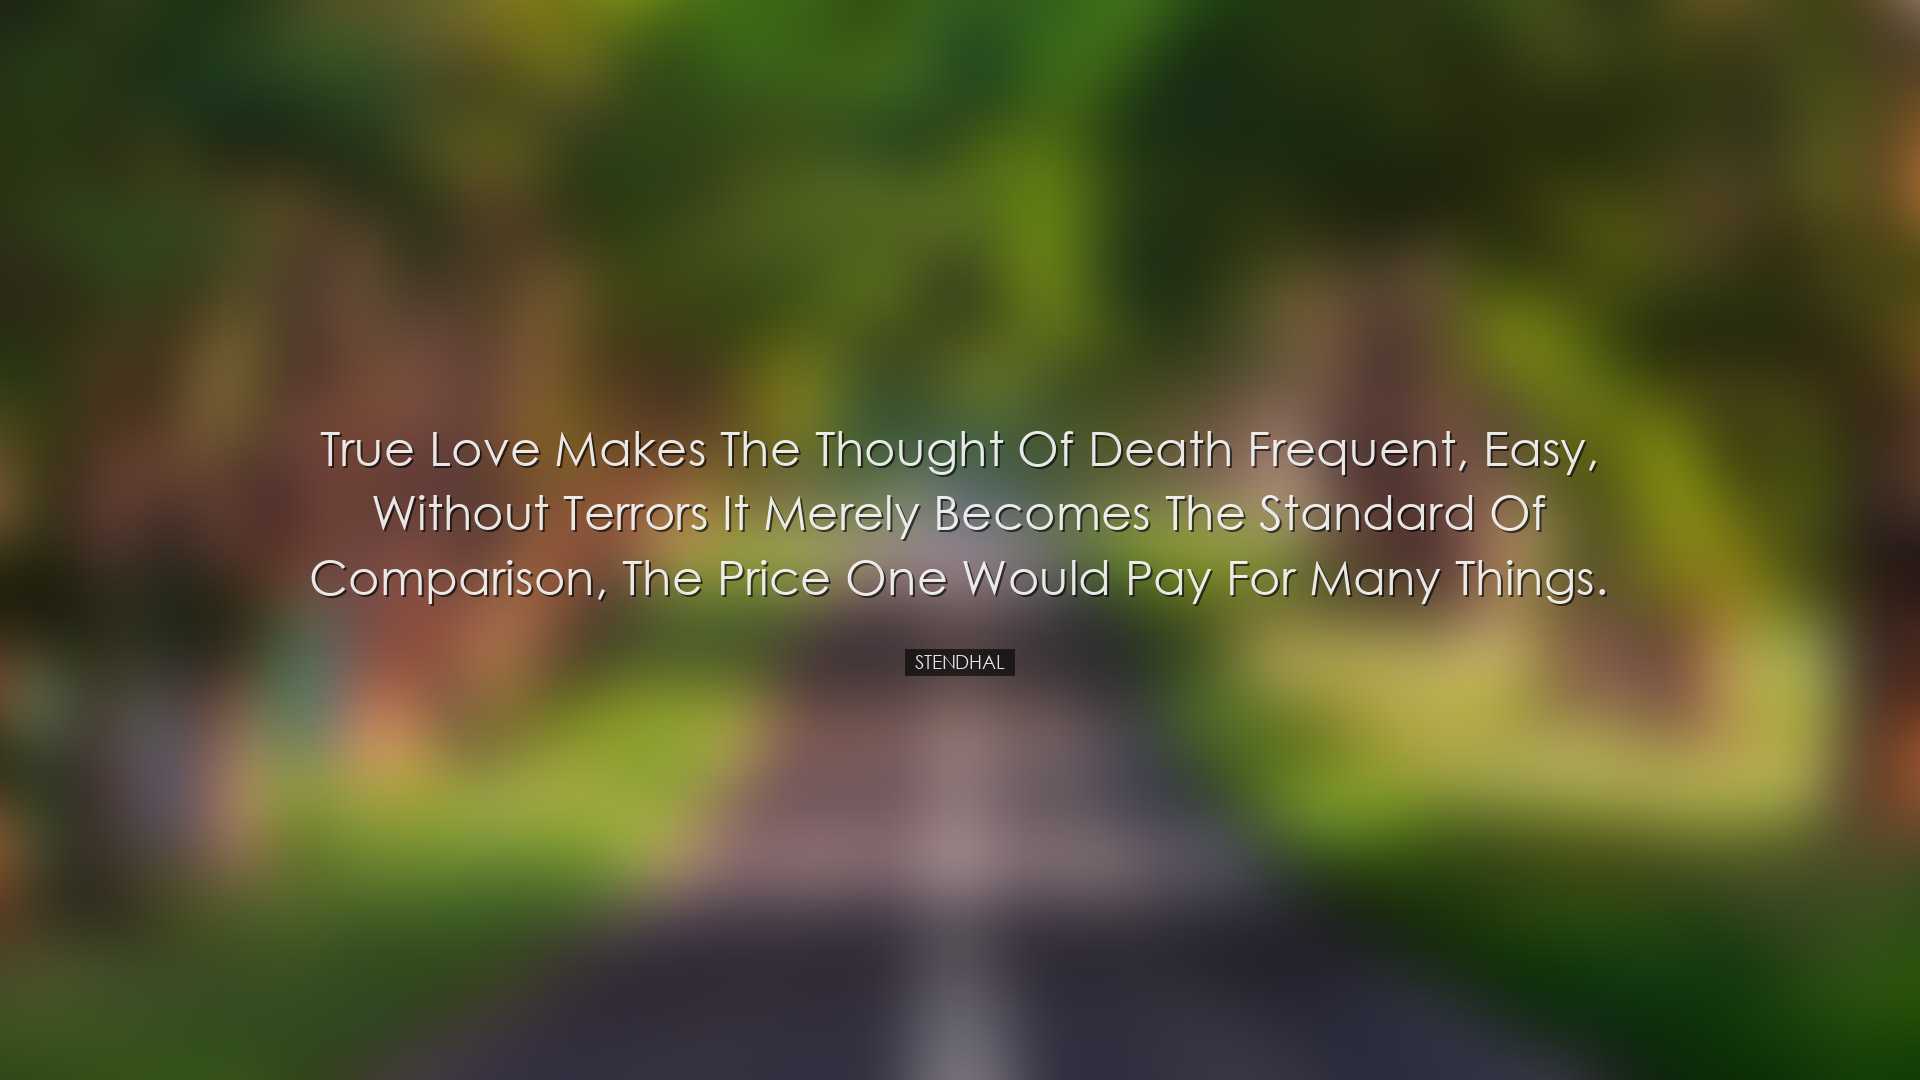 True love makes the thought of death frequent, easy, without terro